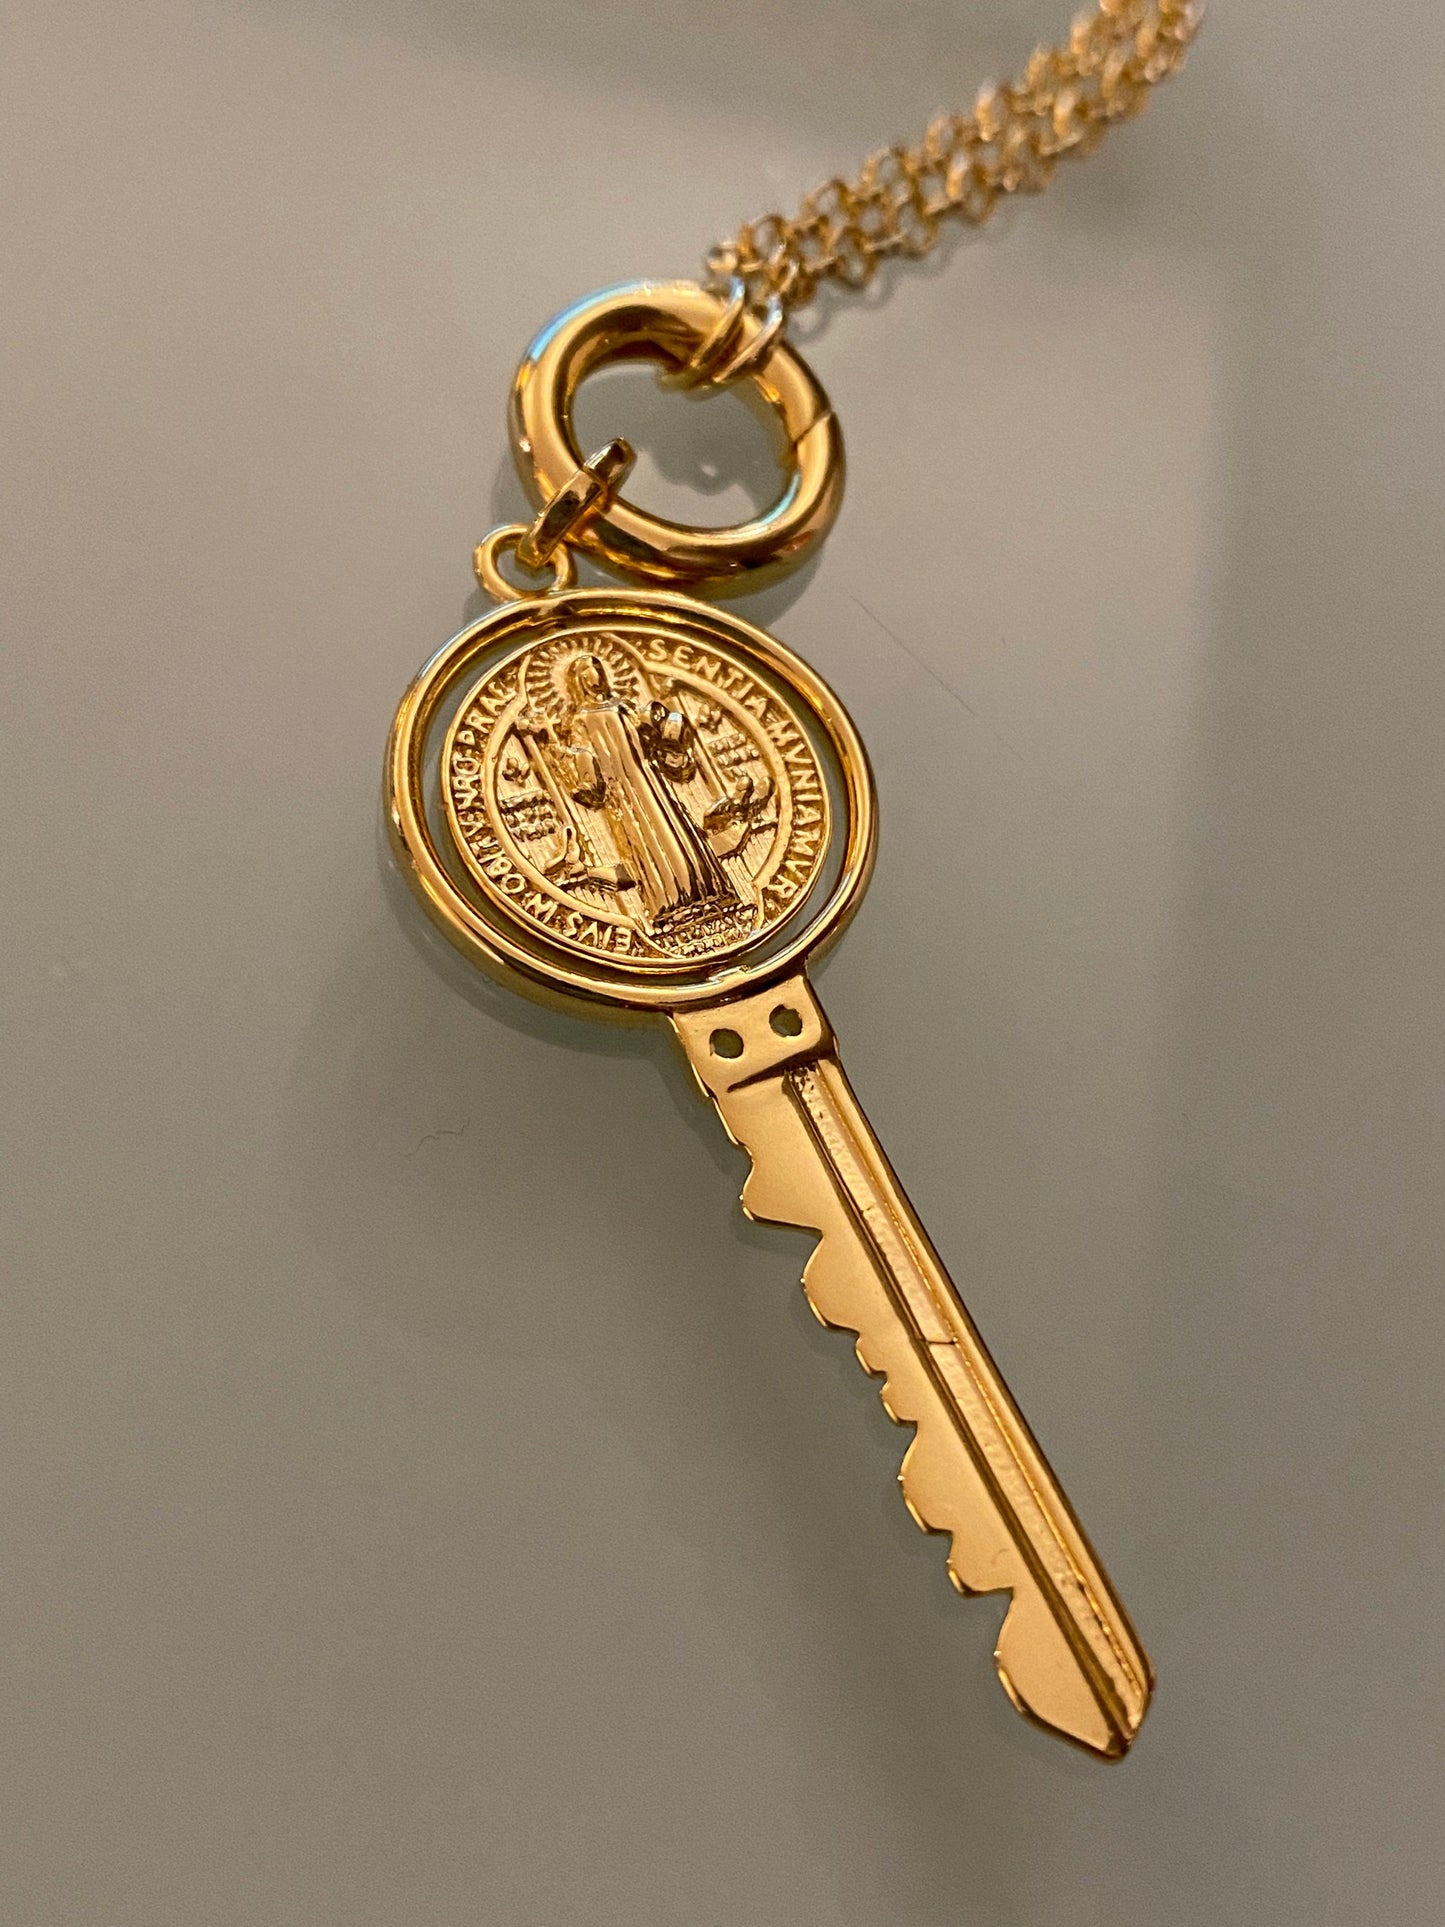 GoldFi 18k Gold Filled Key Pendant Featuring Swivel Medal Of St. Benedict